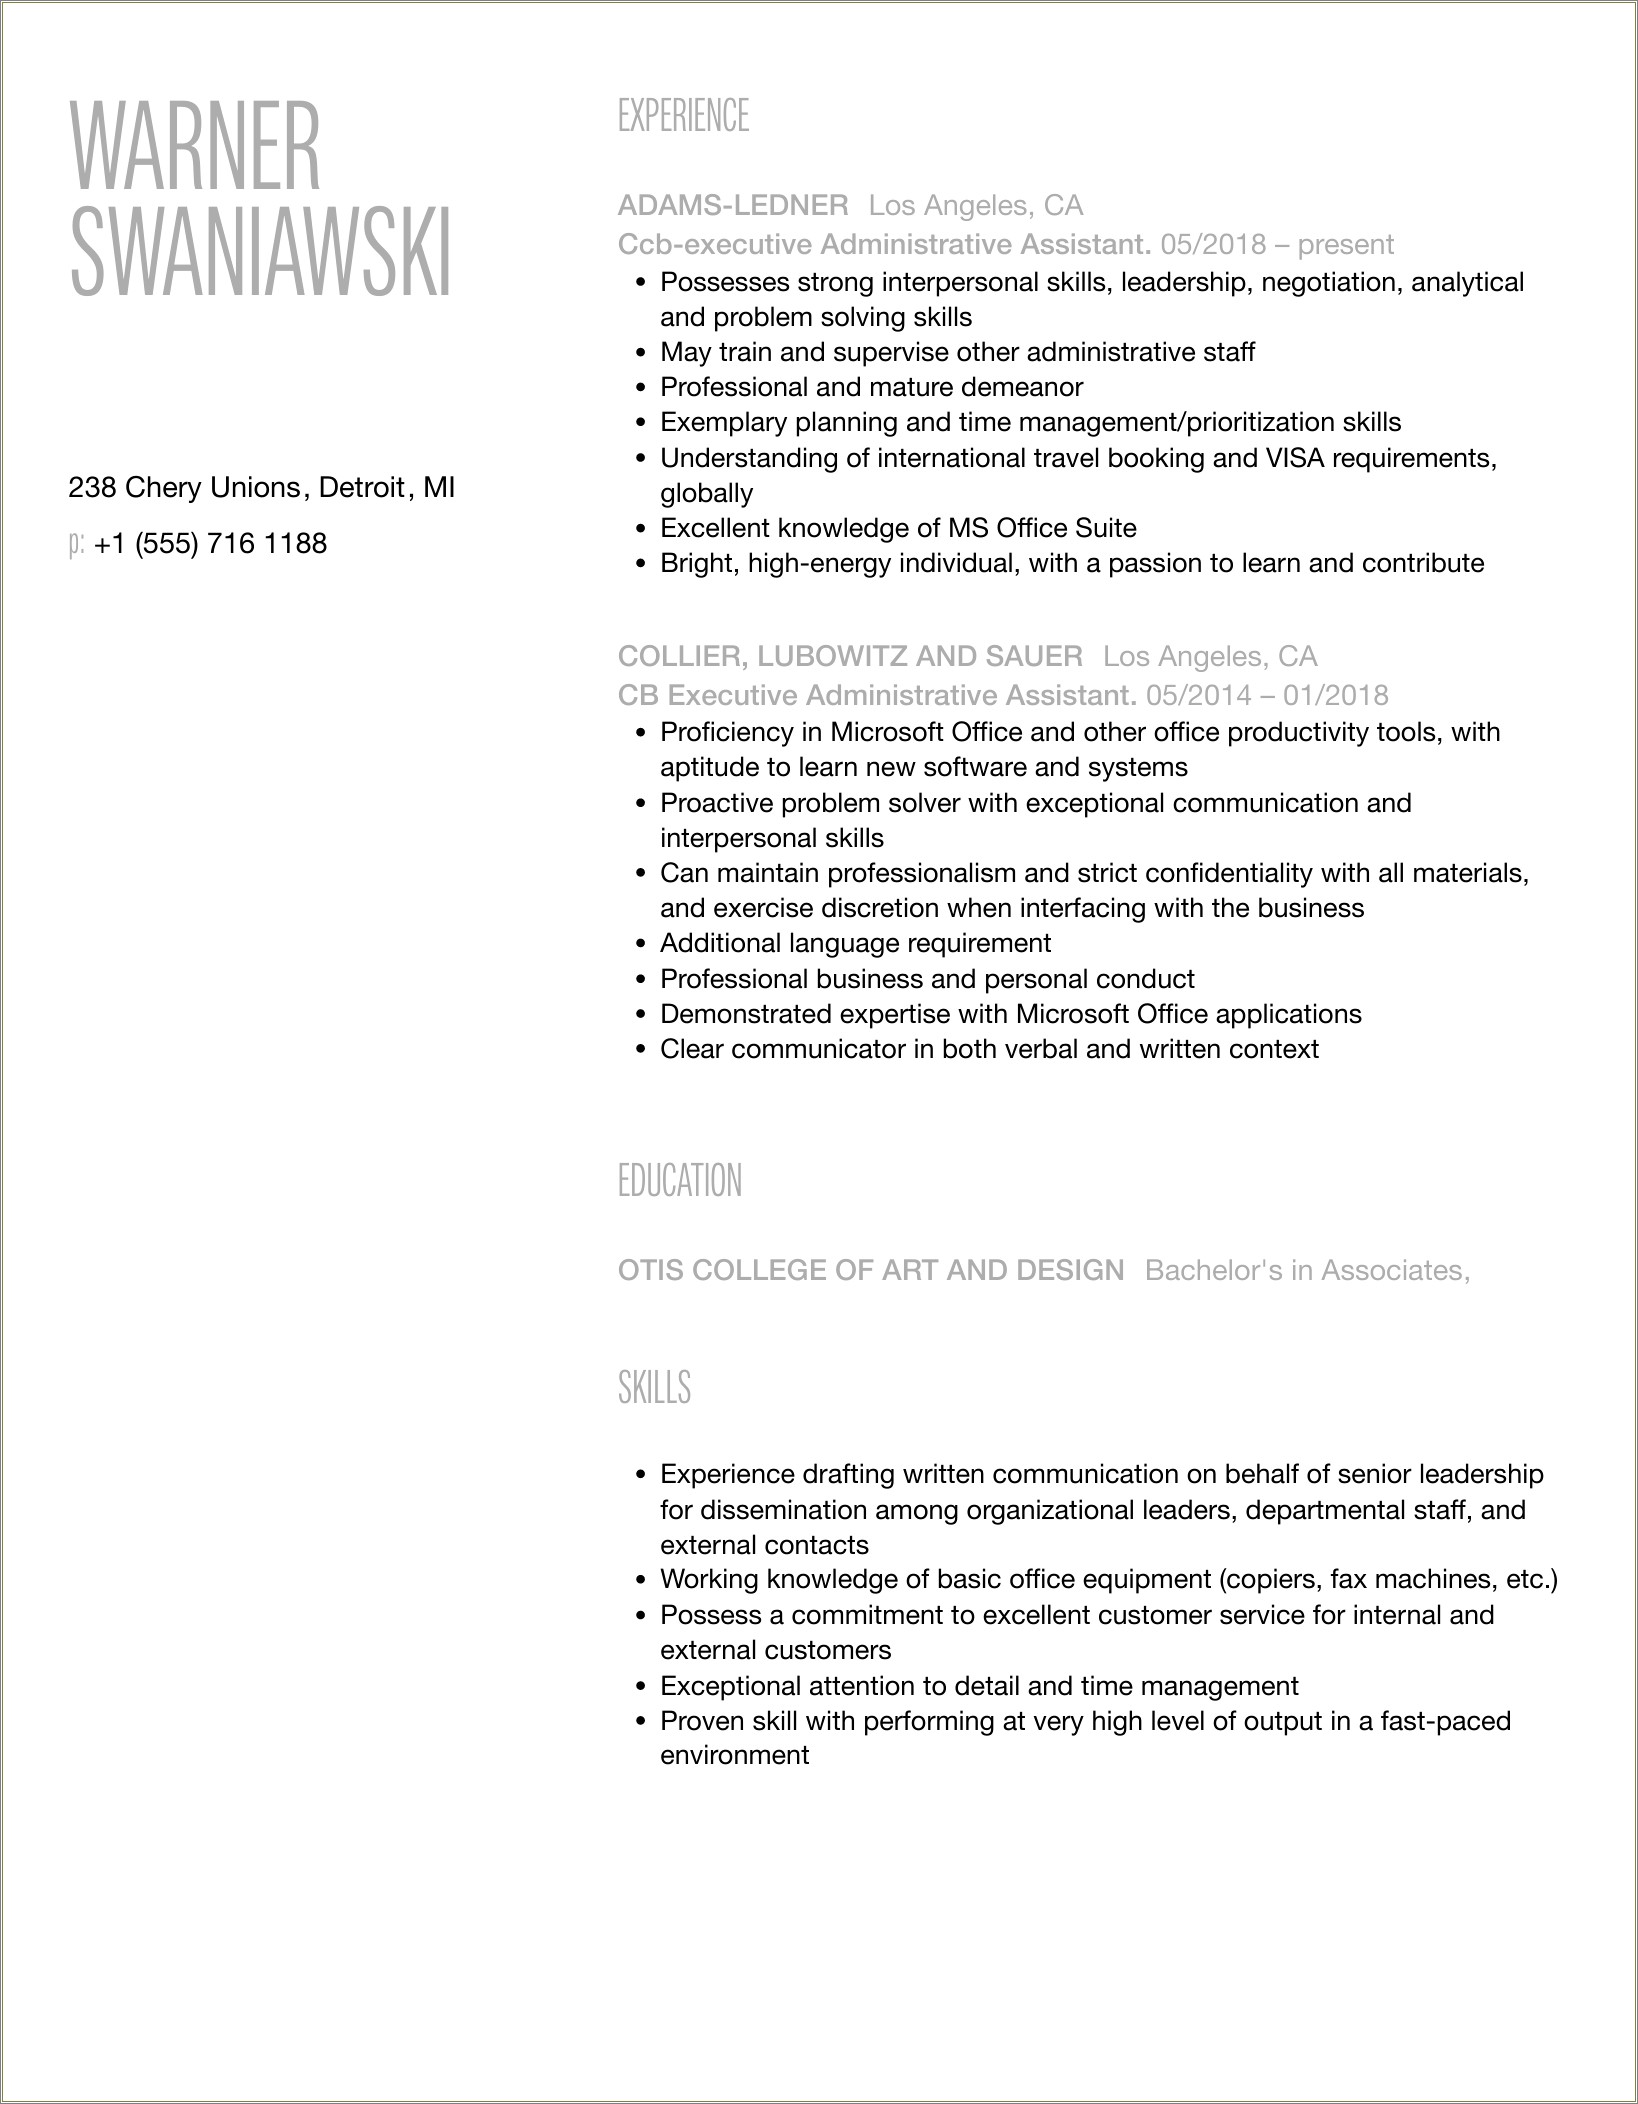 Resume Samples For Entry Level Administrative Assistant